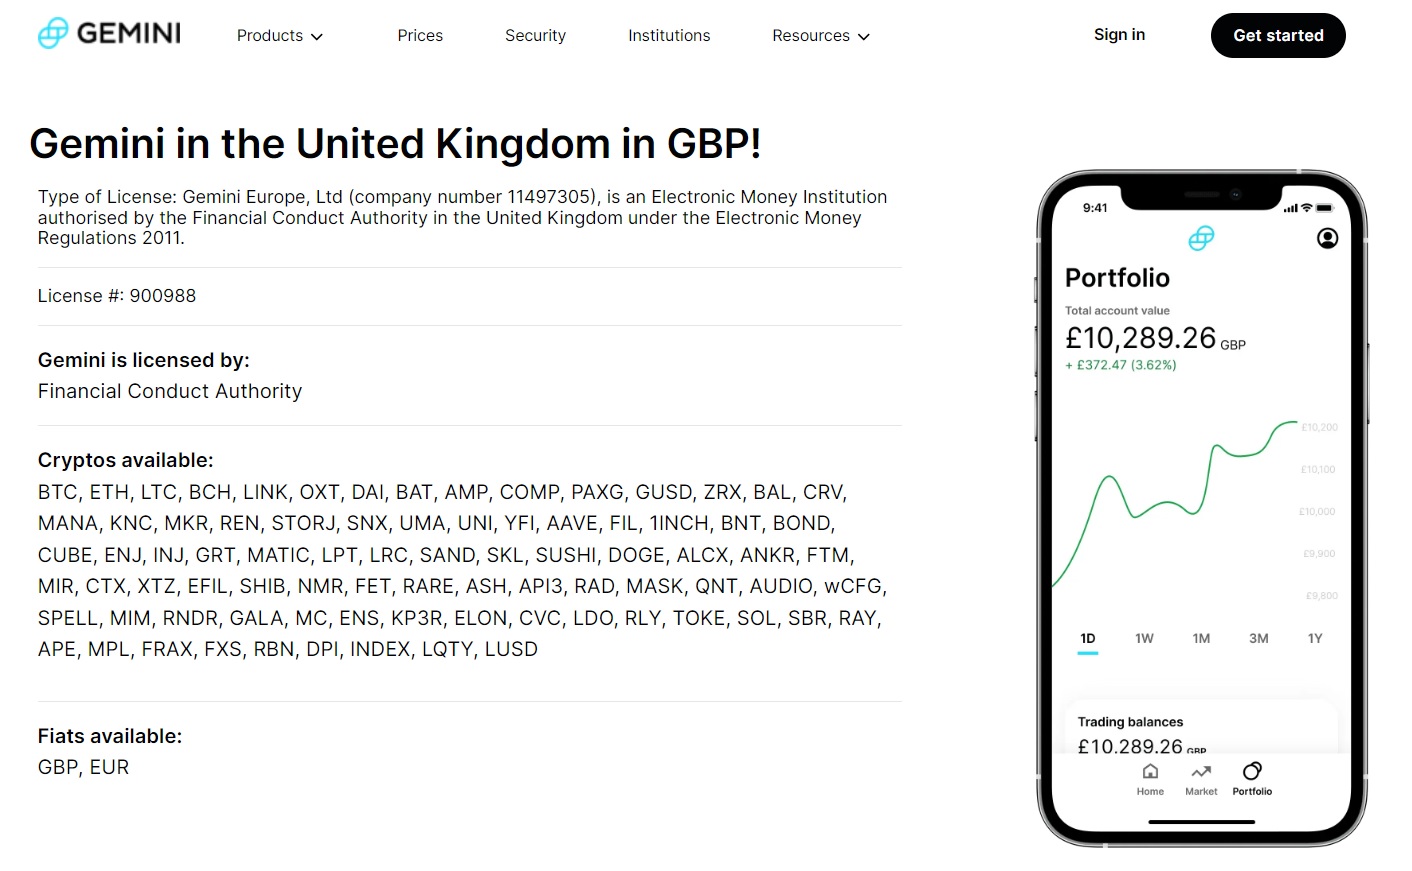 Gemini website and FCA licence for UK